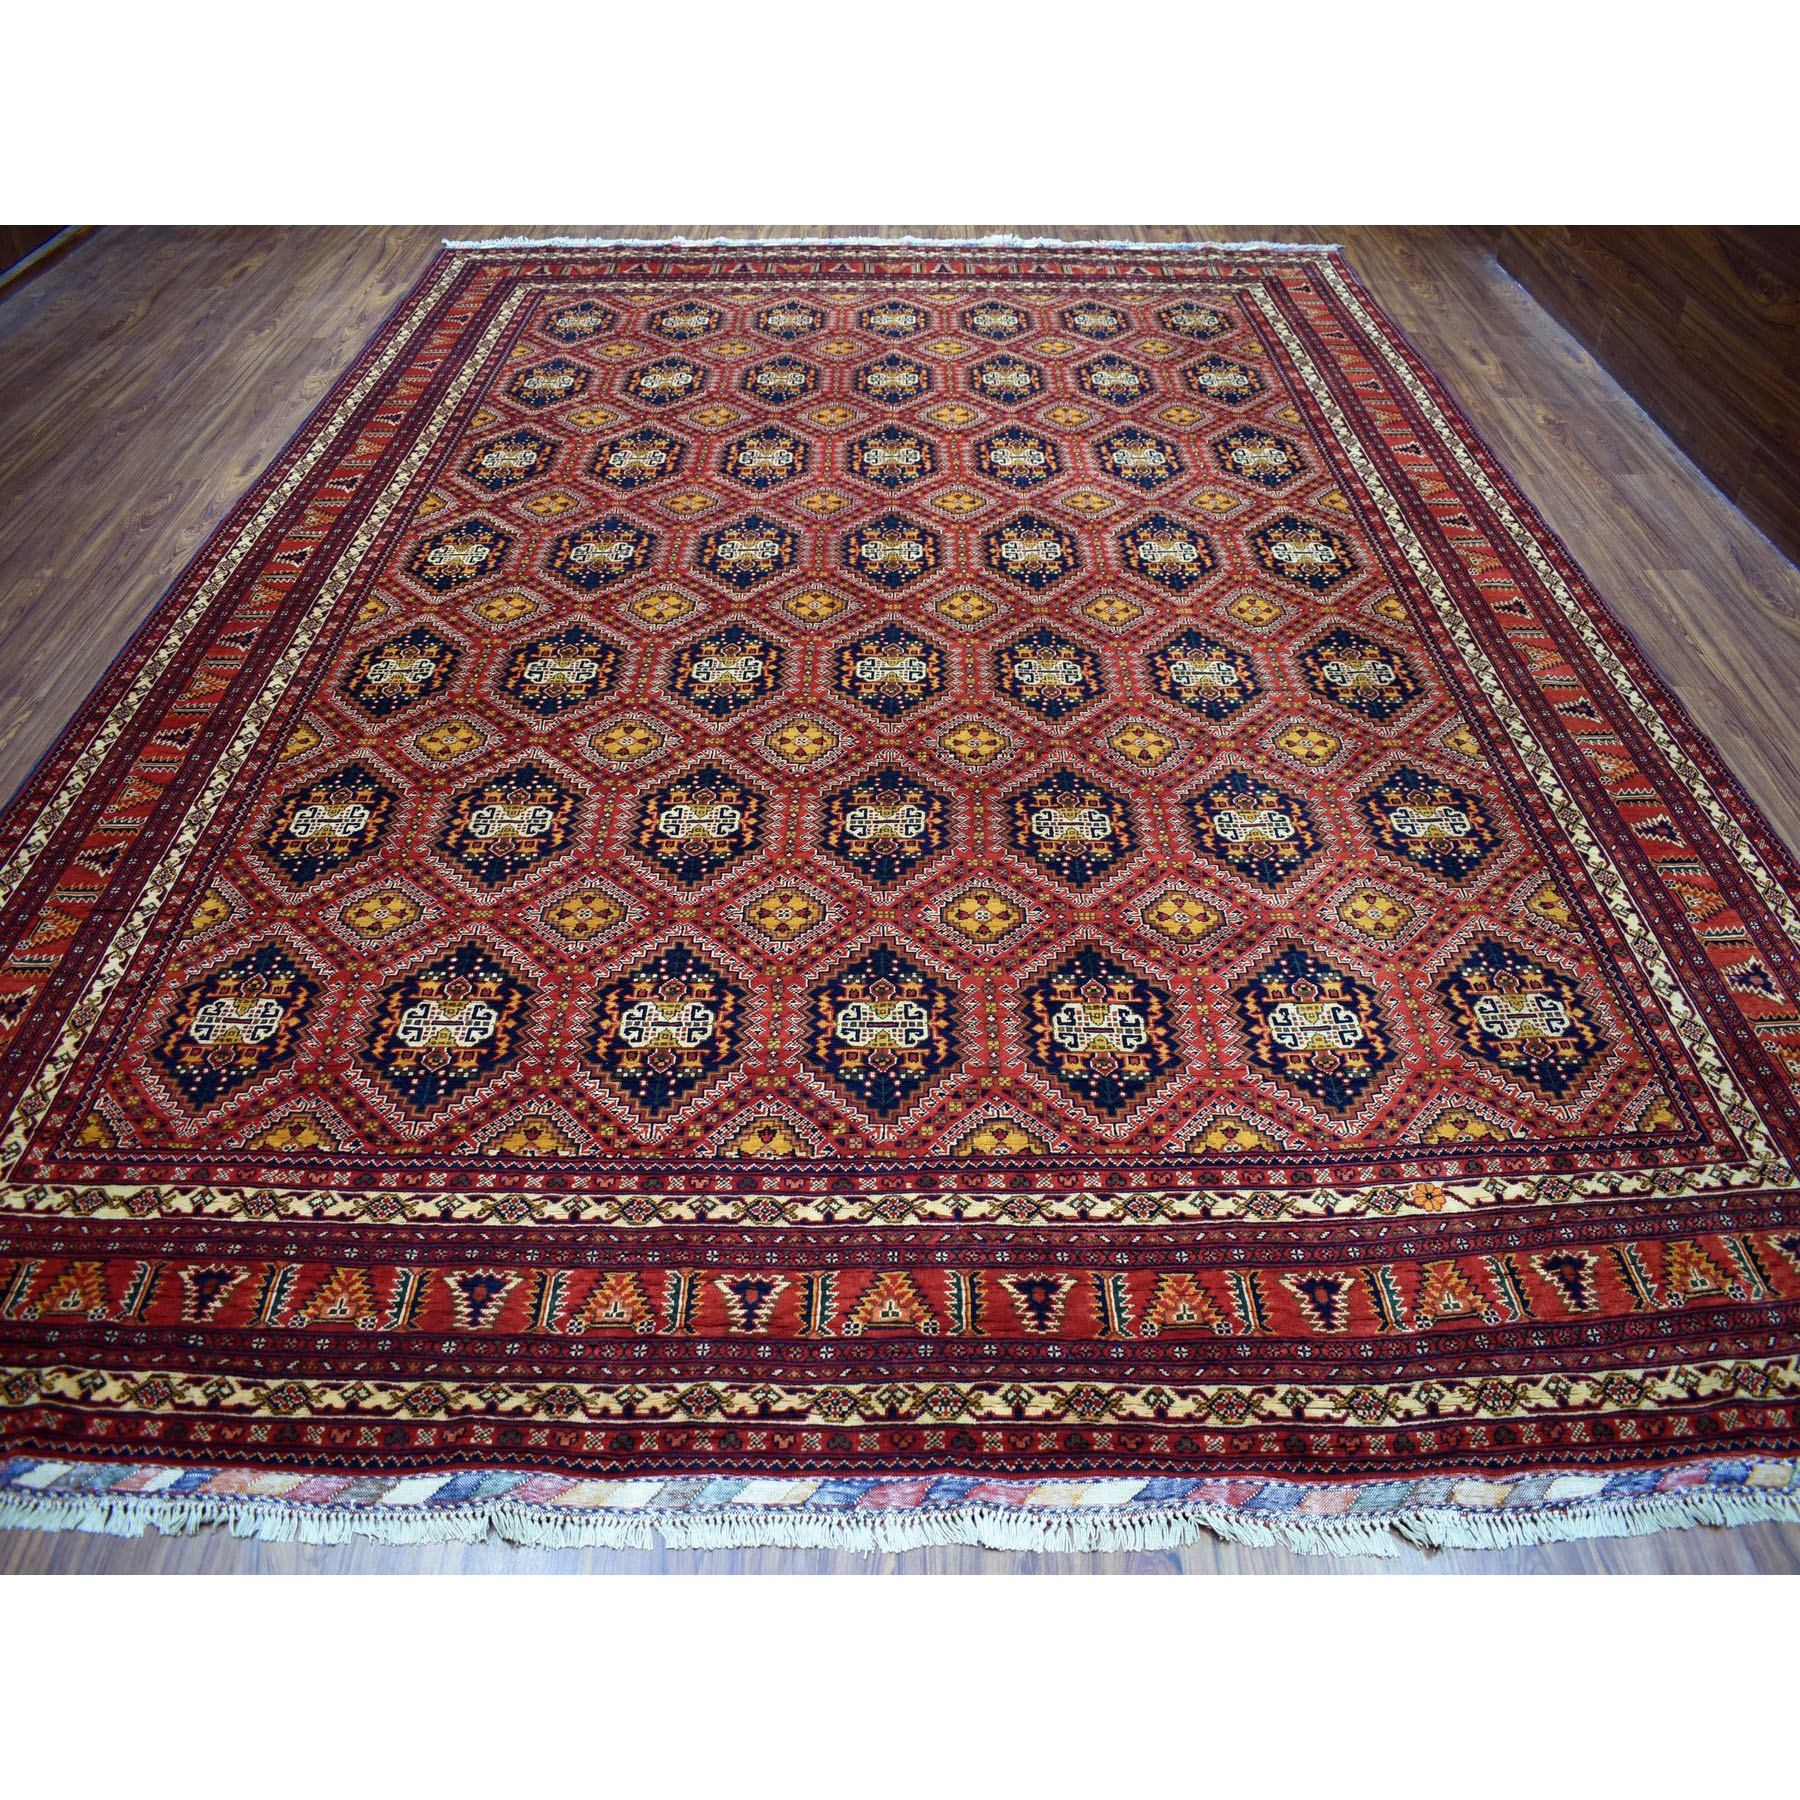 10-3 x13-3  Afghan Khamyab Natural Dyes Pure Wool Hand-Knotted Oriental Rug 